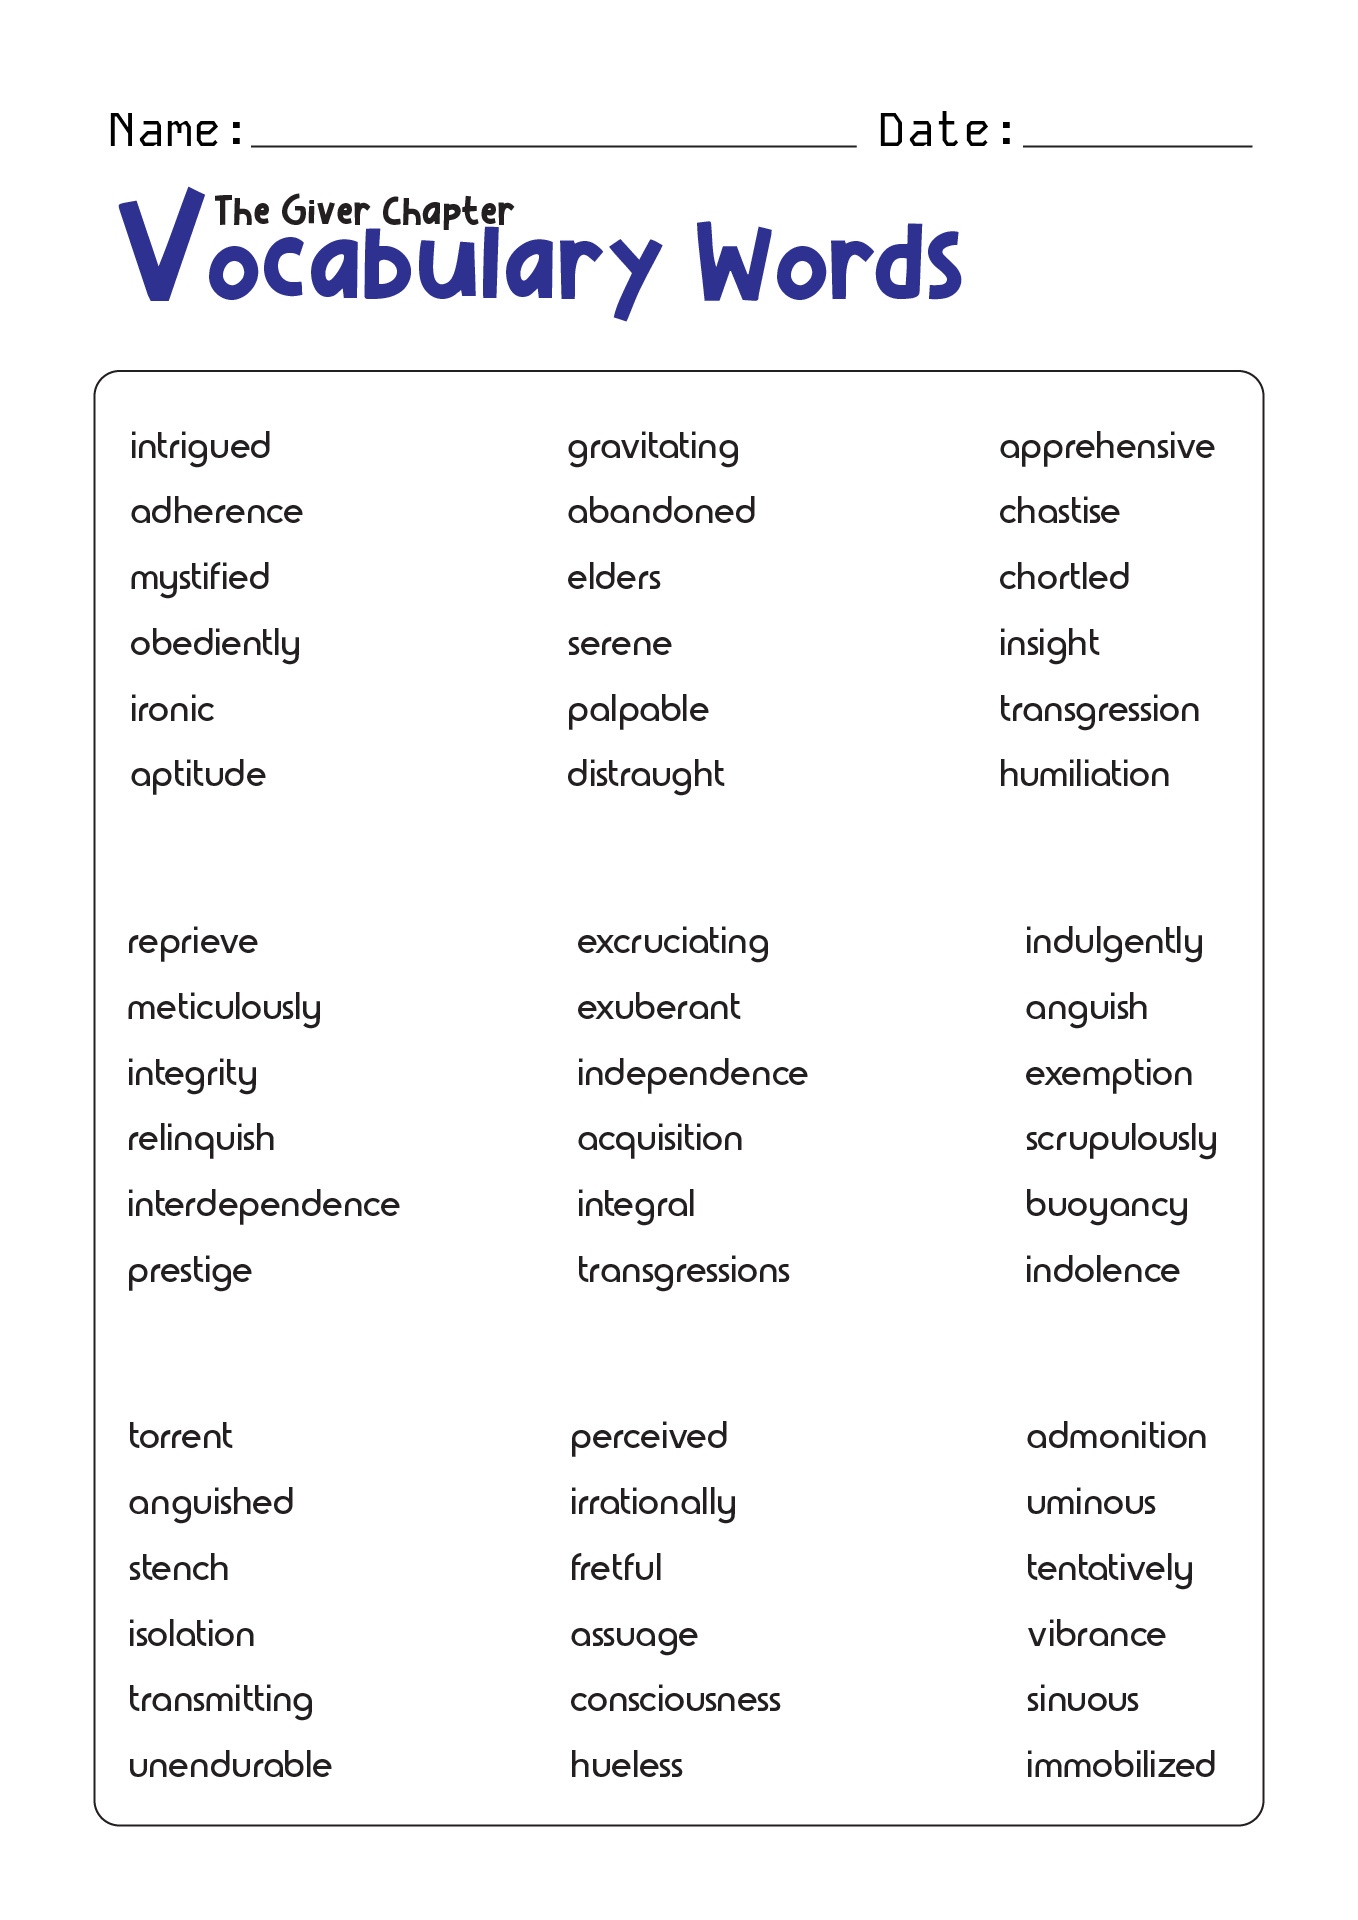 The Giver Chapter Vocabulary Words